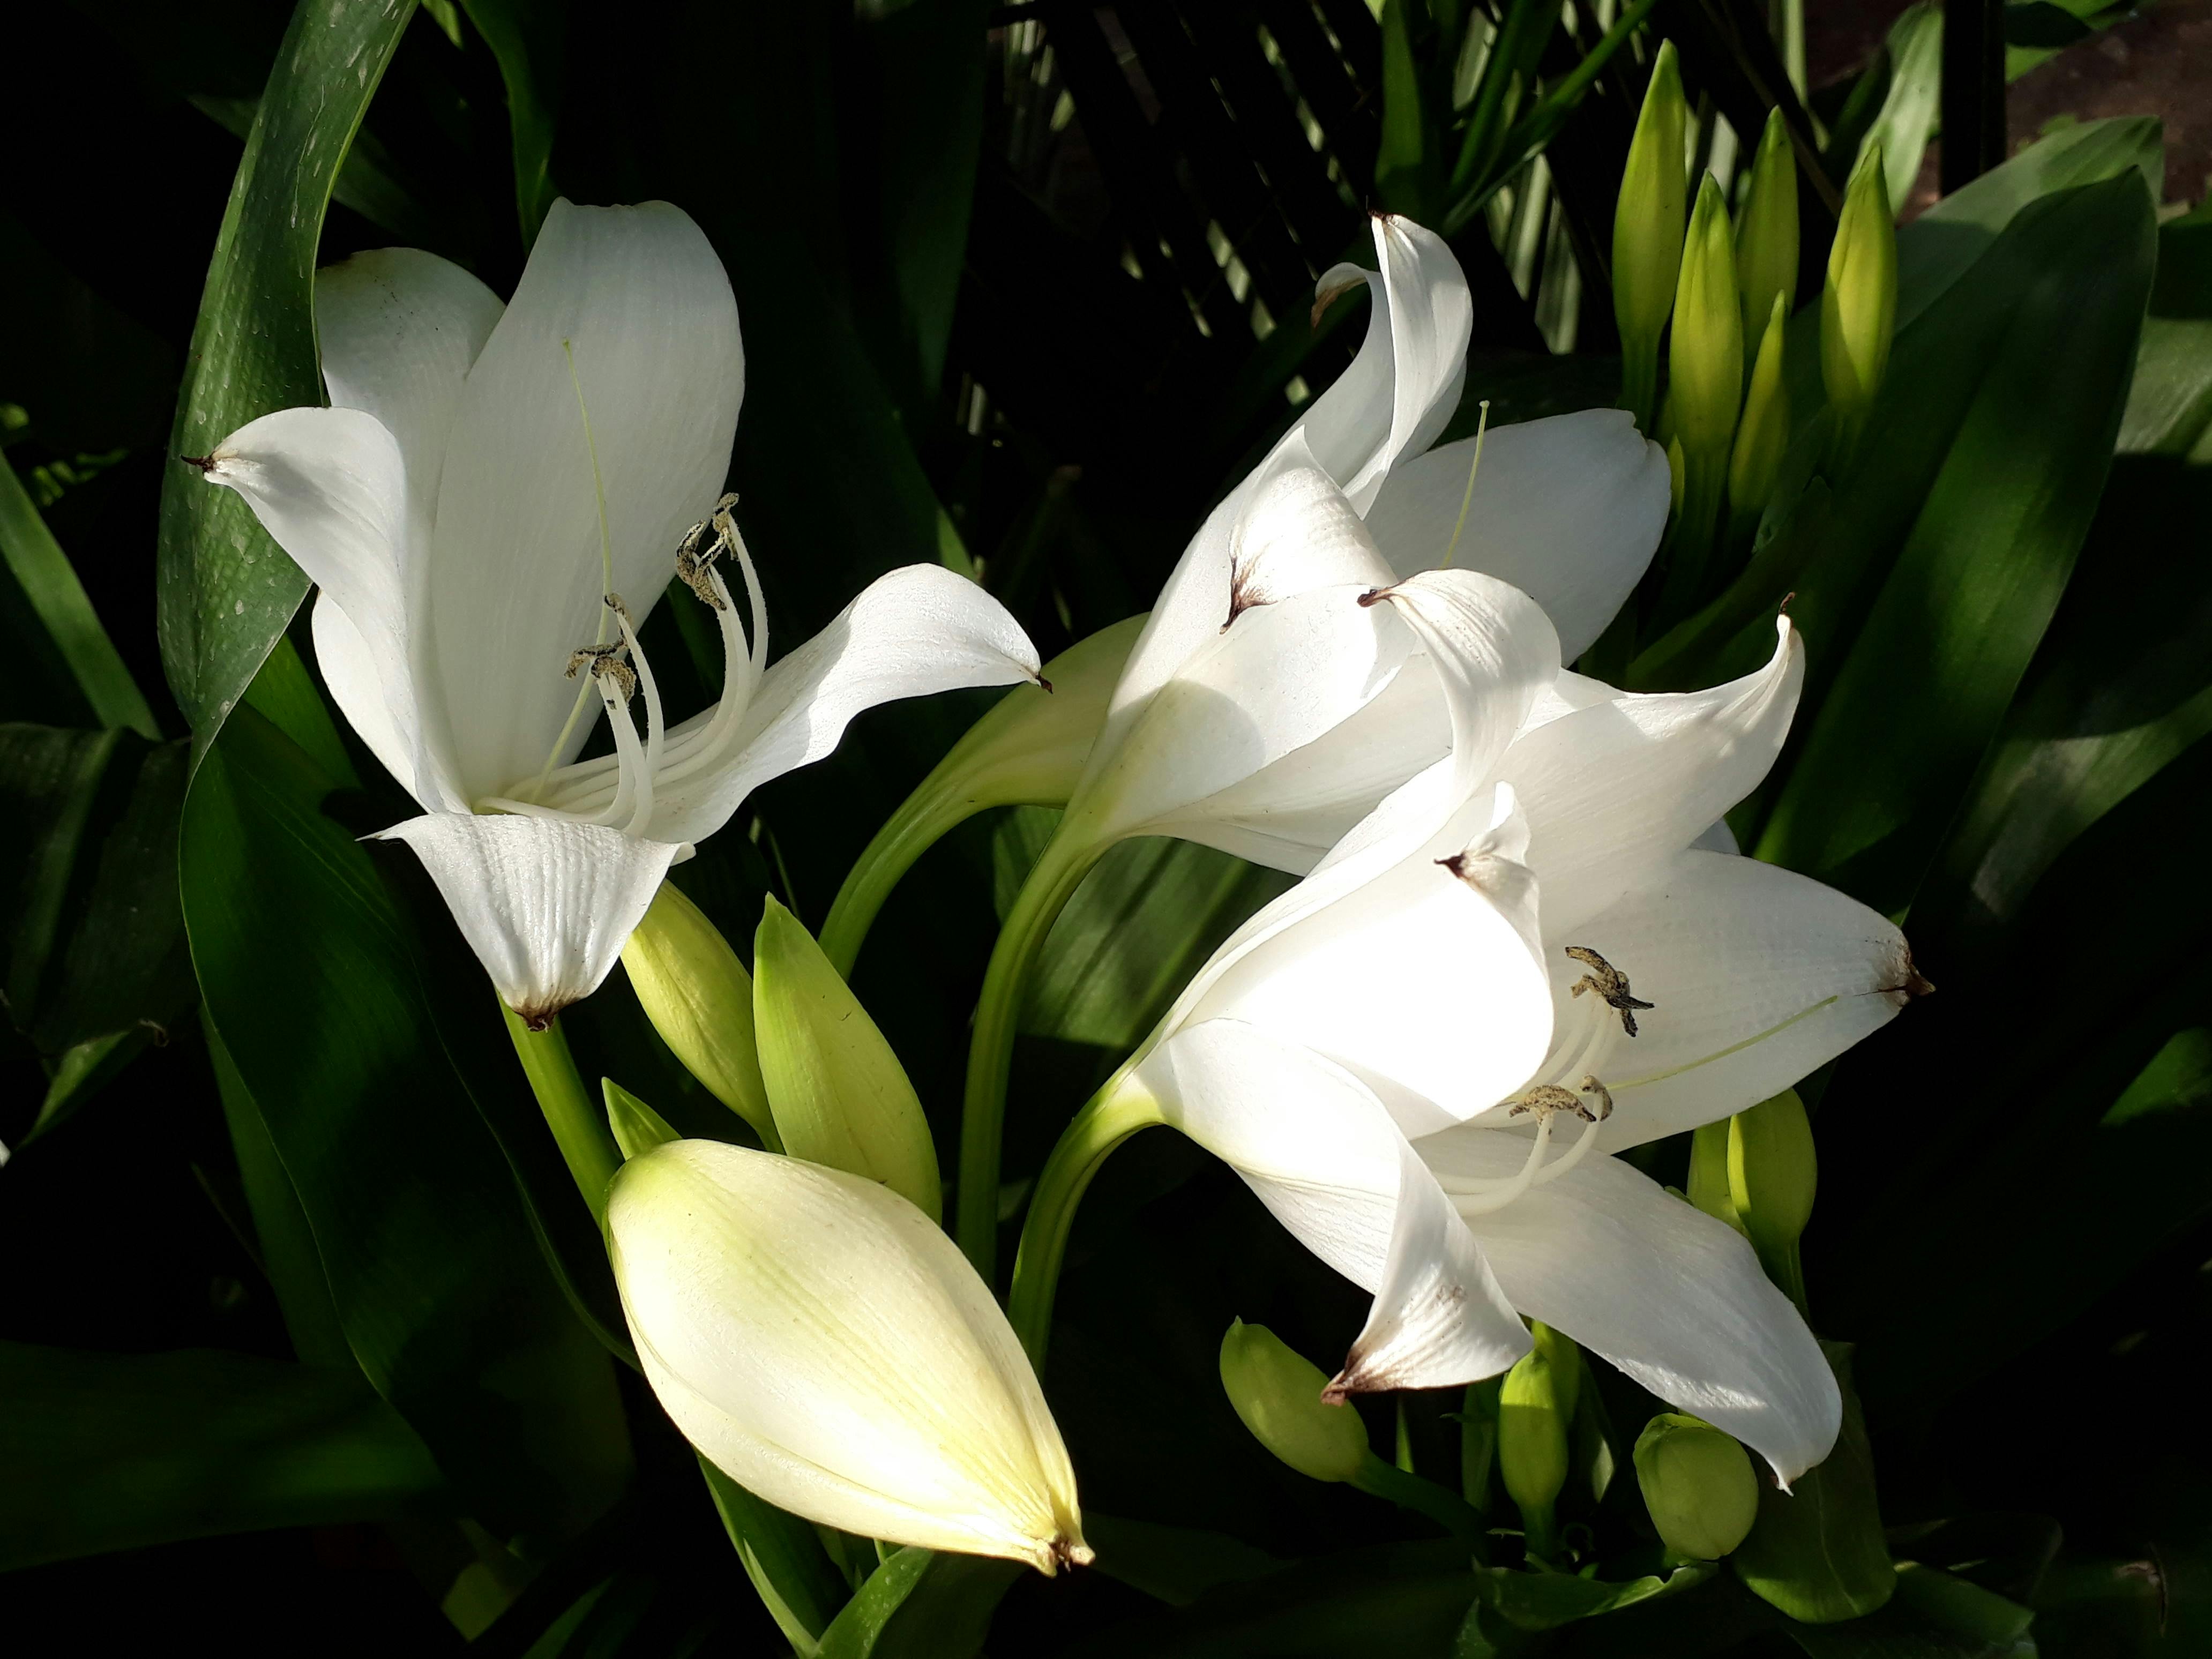 Free stock photo of White Lily flower, white lily flower and buds